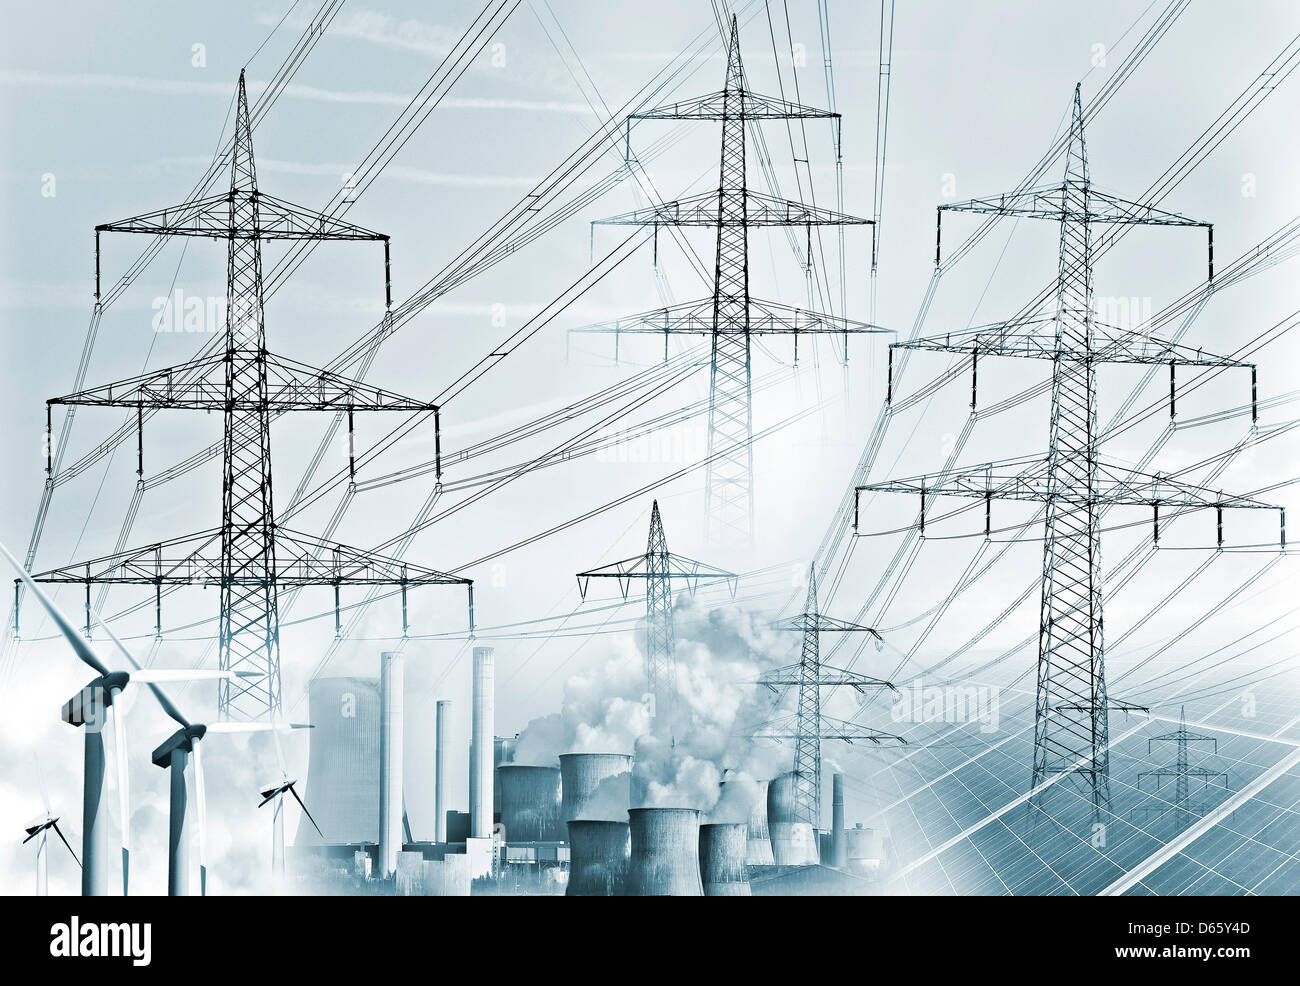 Composing on electricity classic, and with wind and solar energy and related to electricity transmission. Stock Photo